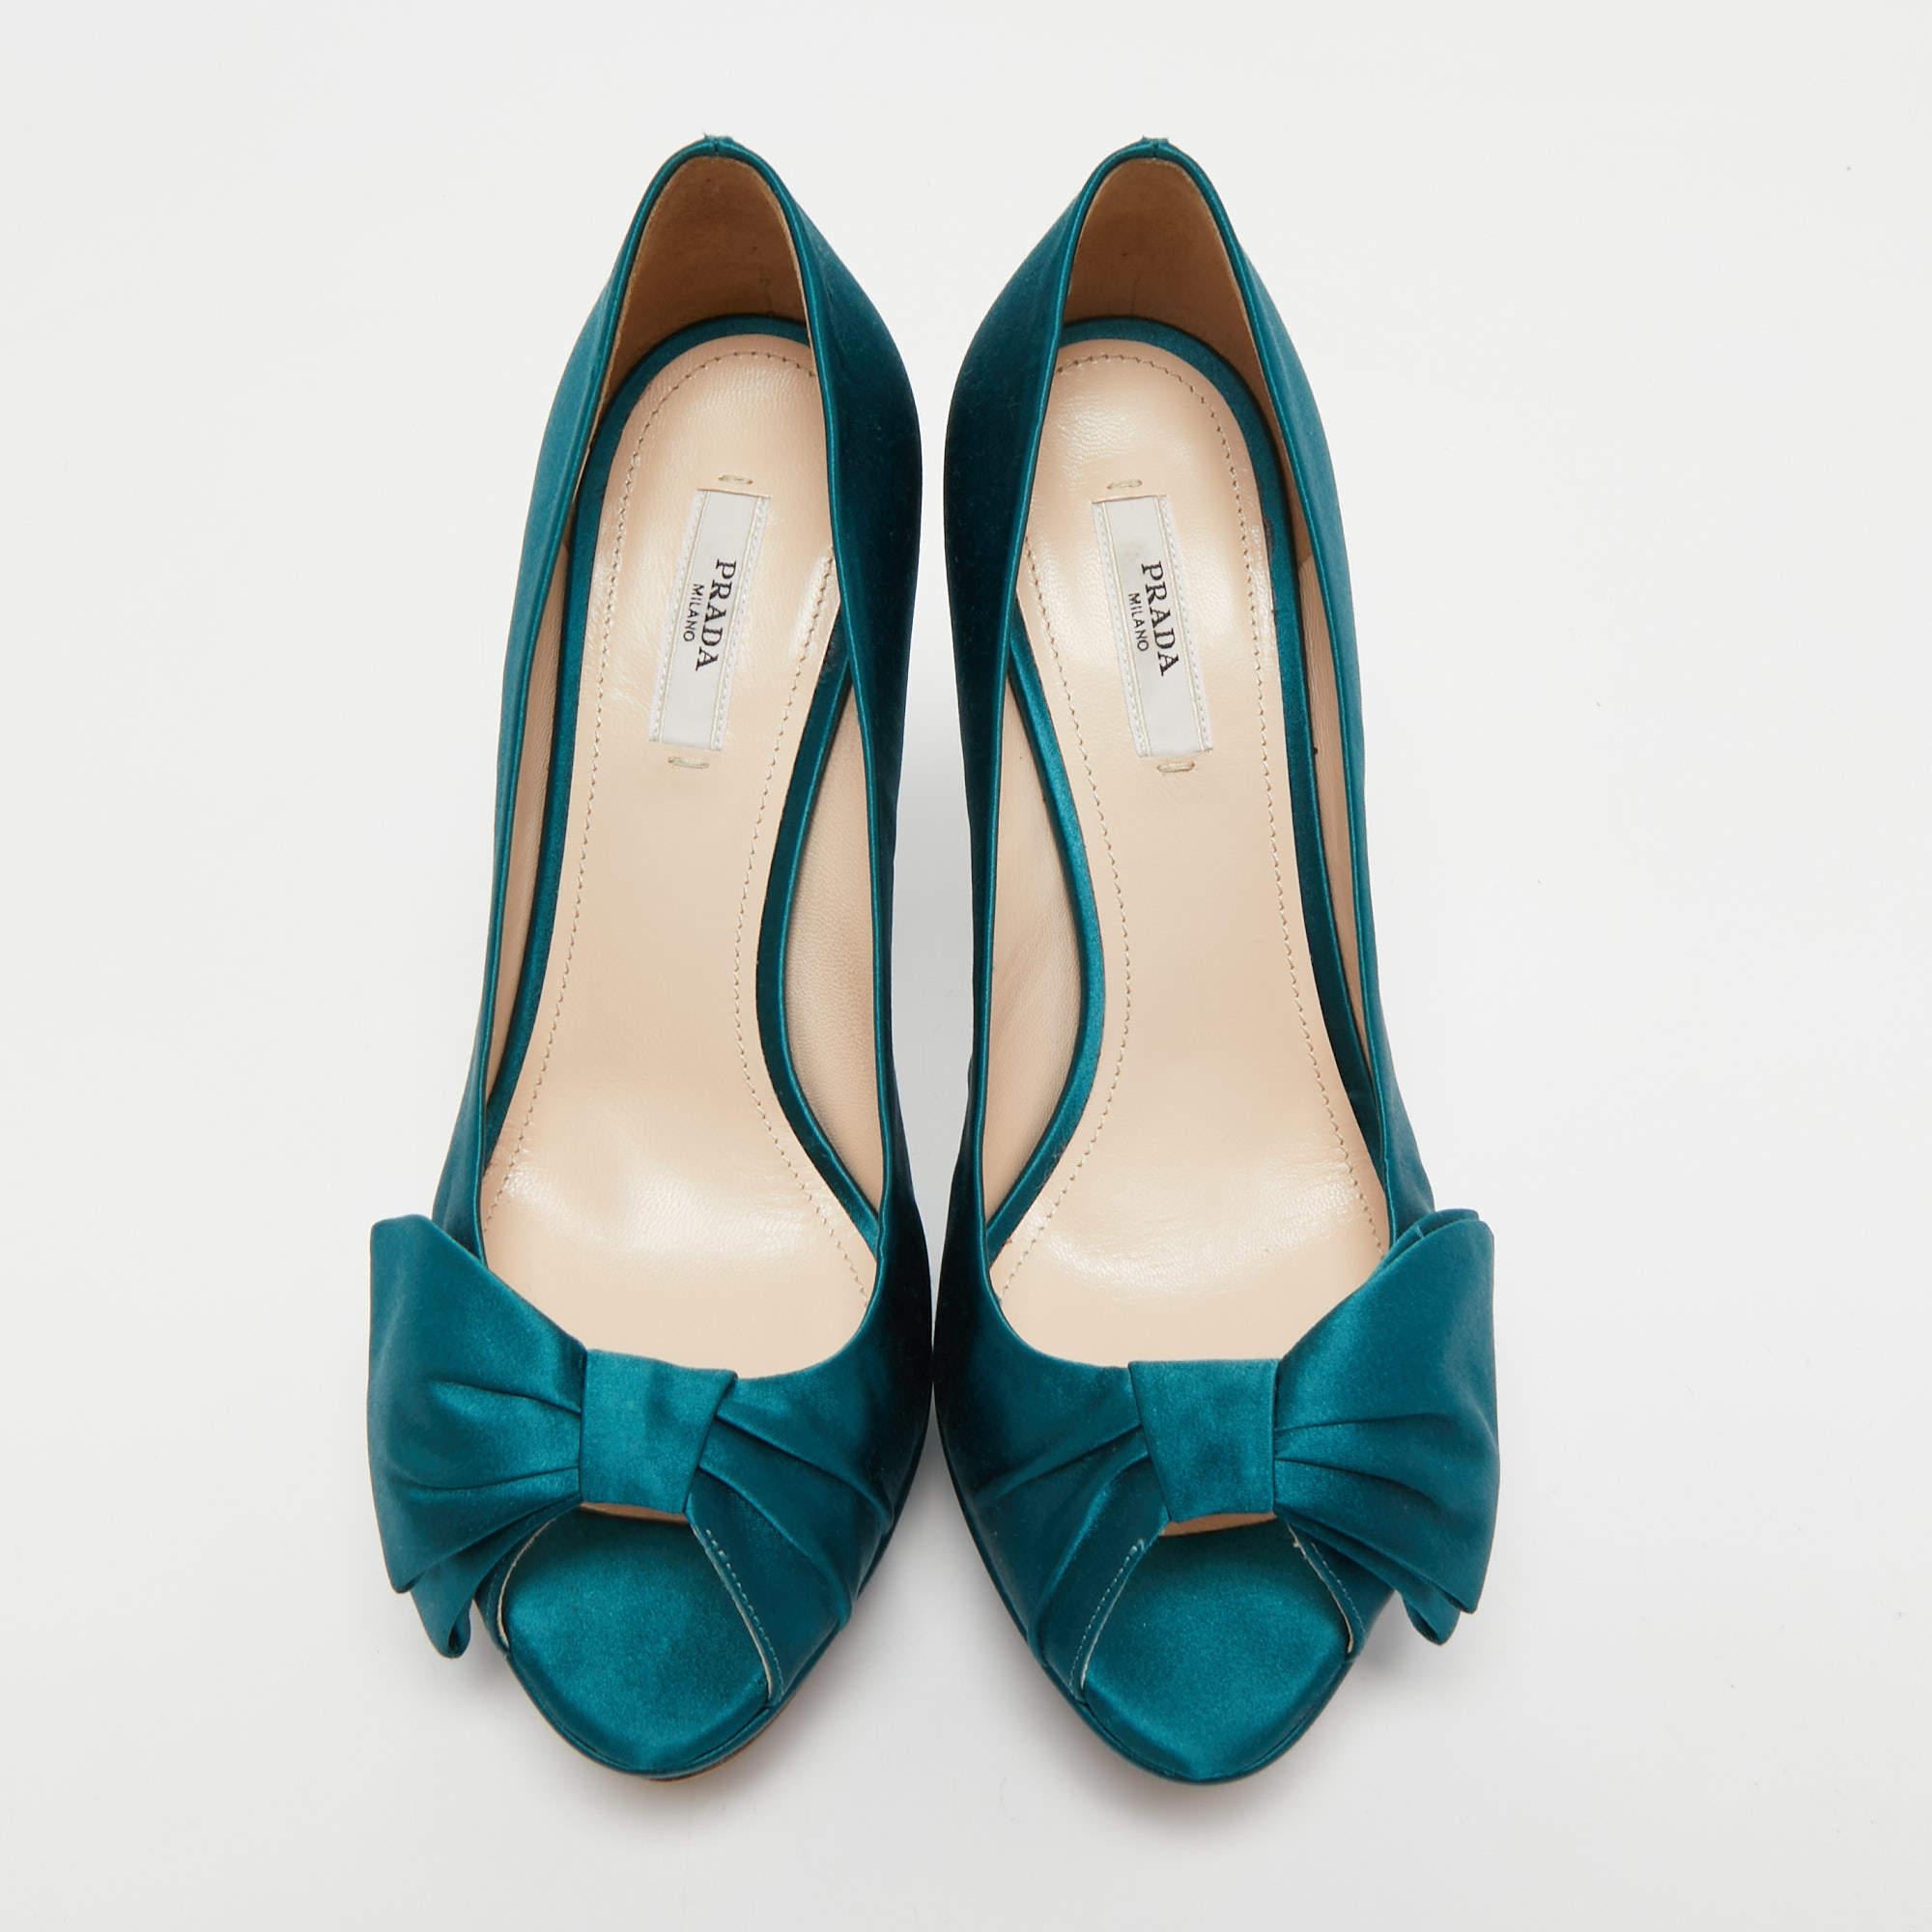 Exhibit an elegant style with this pair of pumps. These designer pumps are crafted from quality materials. They are set on durable soles and high heels.

Includes: Original Box, Info Booklet, Extra Heel Tips

